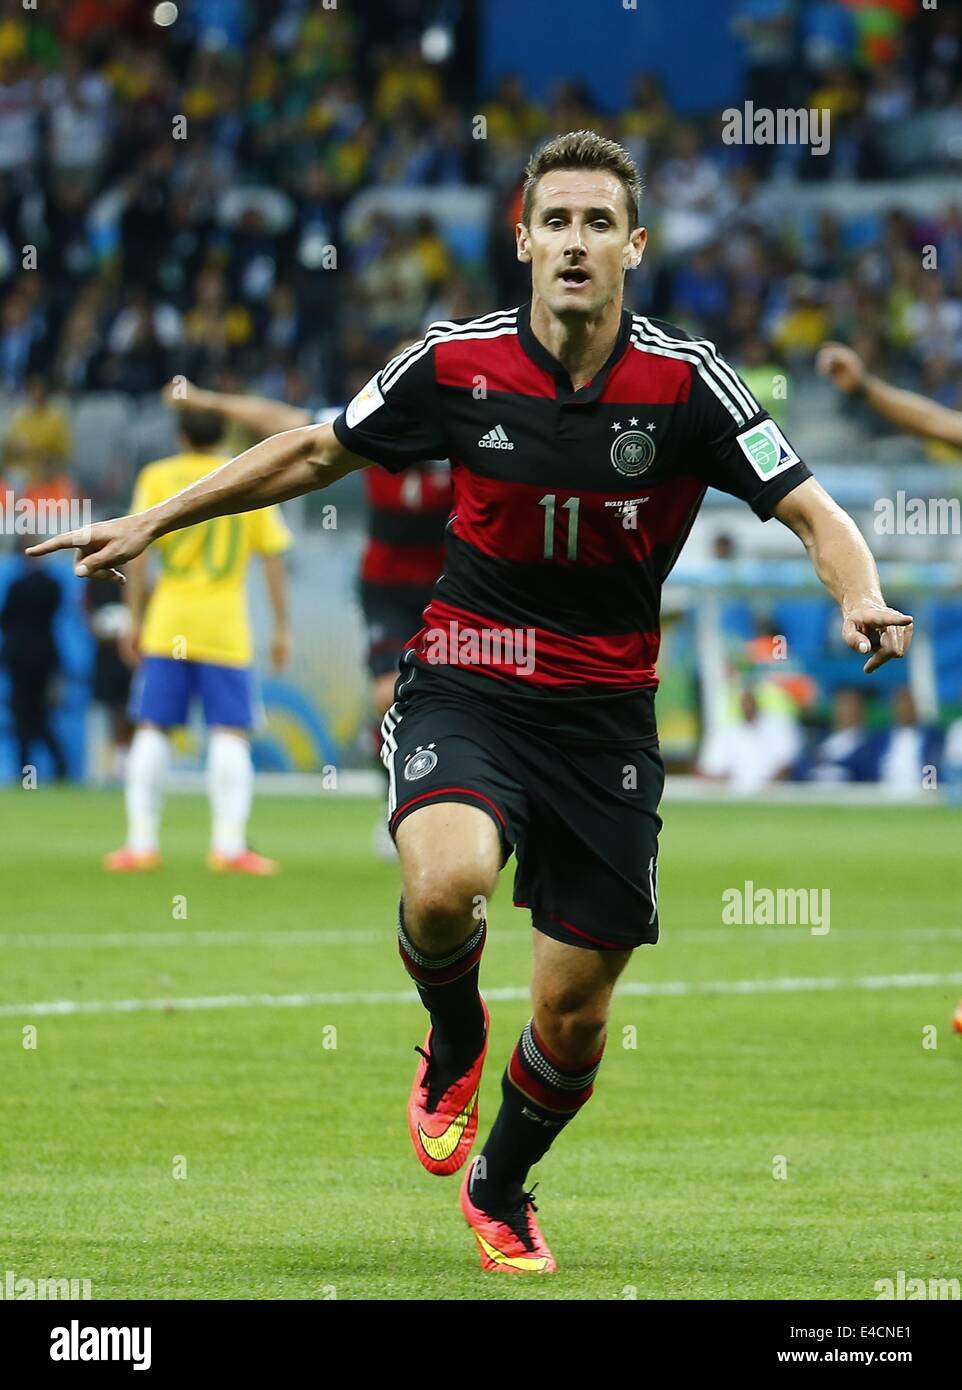 Belo Horizonte, Brazil. 8th July, 2014. Germany's Miroslav Klose celebrates a goal during a semifinal match between Brazil and Germany of 2014 FIFA World Cup at the Estadio Mineirao Stadium in Belo Horizonte, Brazil, on July 8, 2014. Credit:  Chen Jianli/Xinhua/Alamy Live News Stock Photo